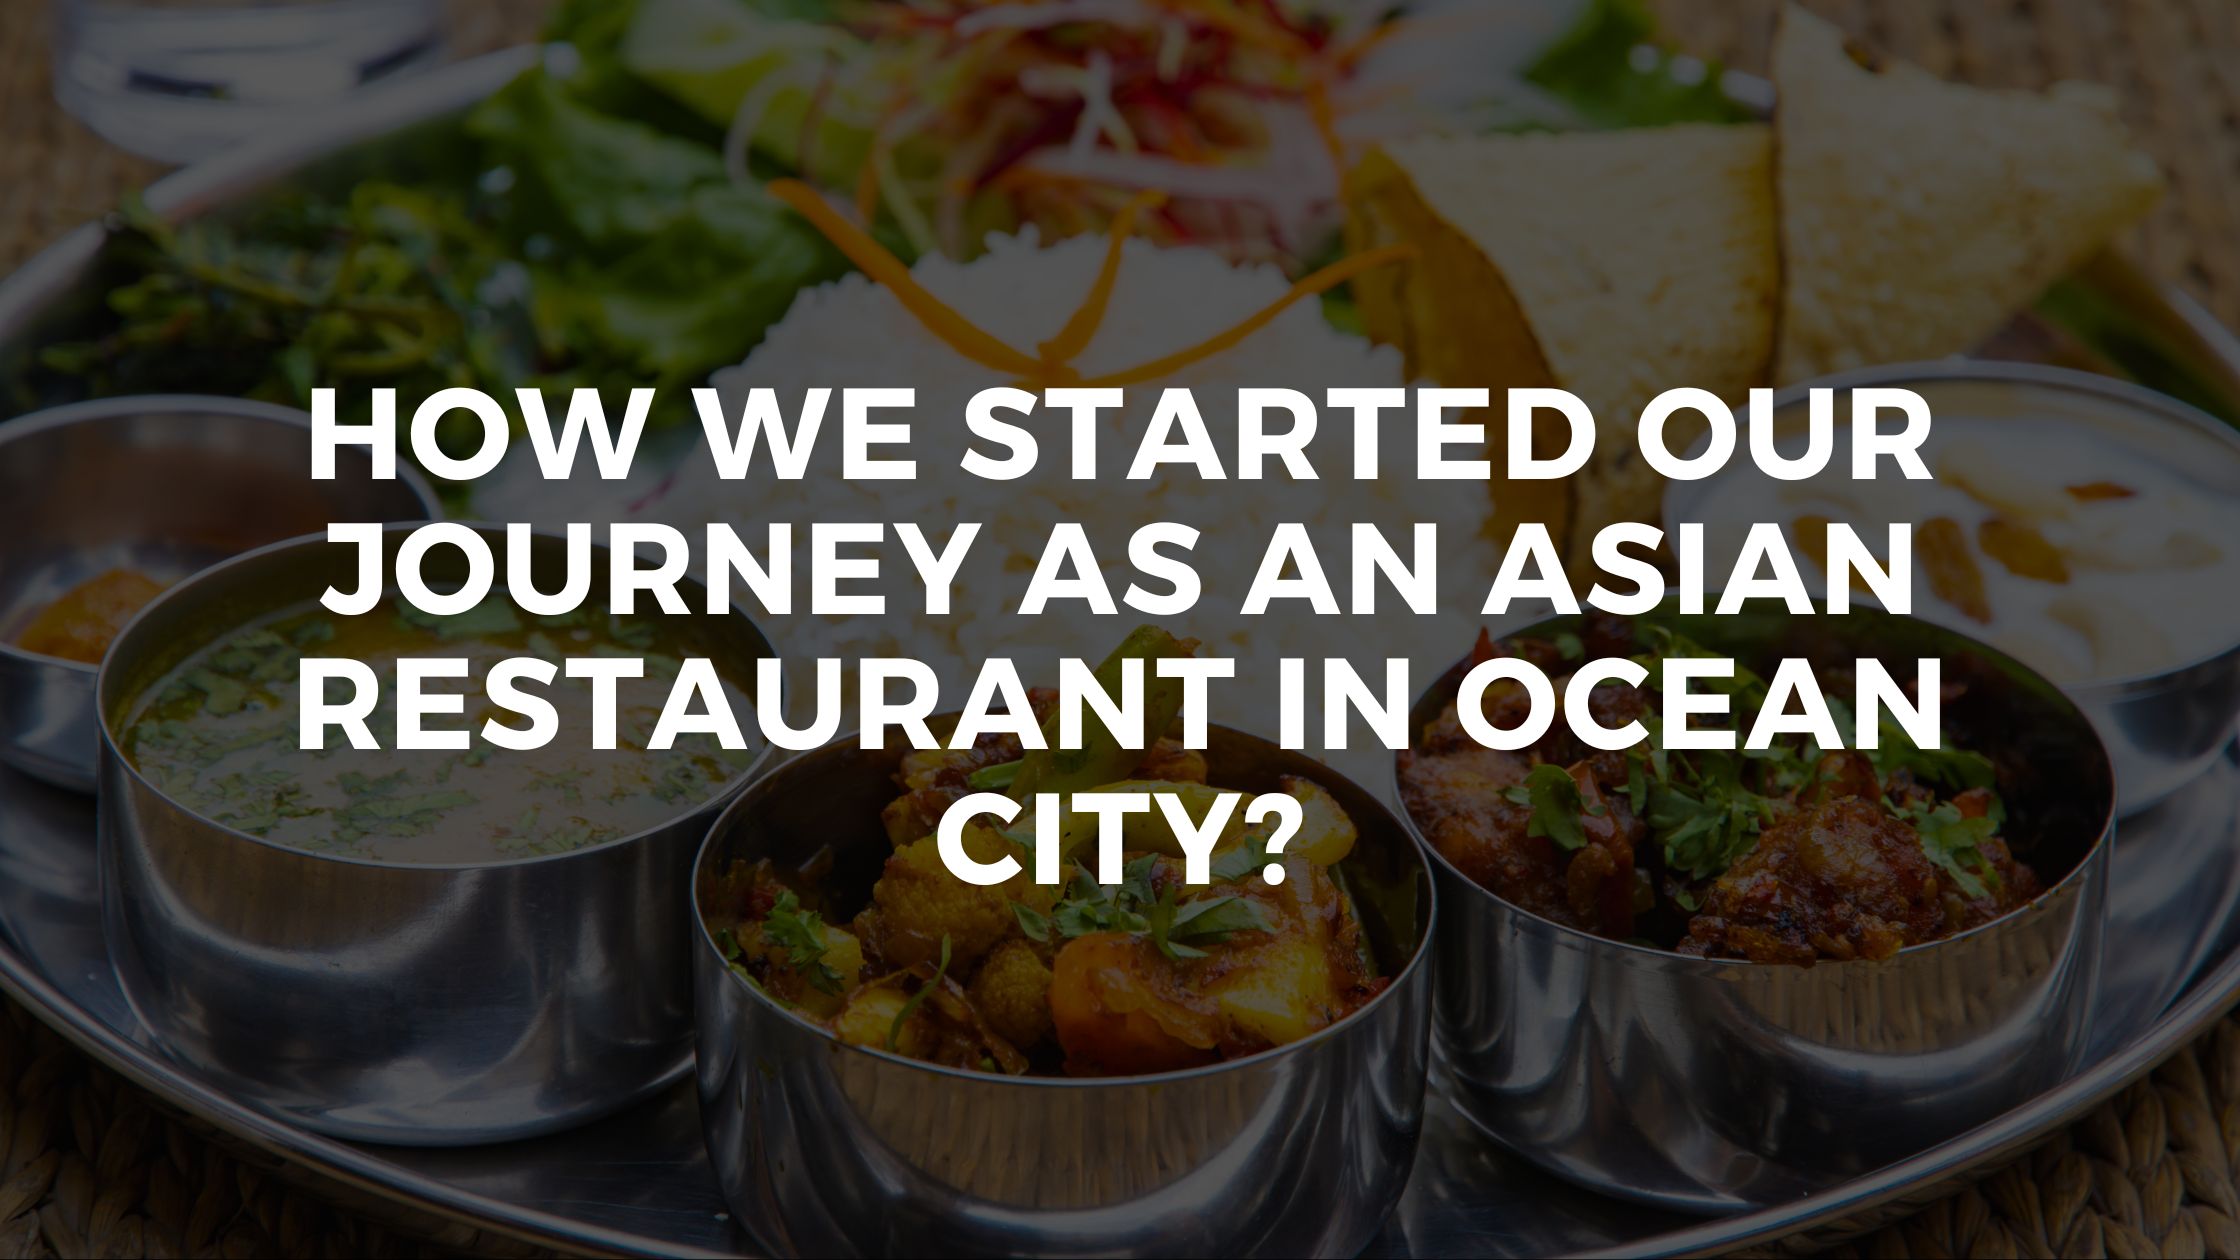 How We Started Our Journey As An Asian Restaurant In Ocean City (Est. 2021)?